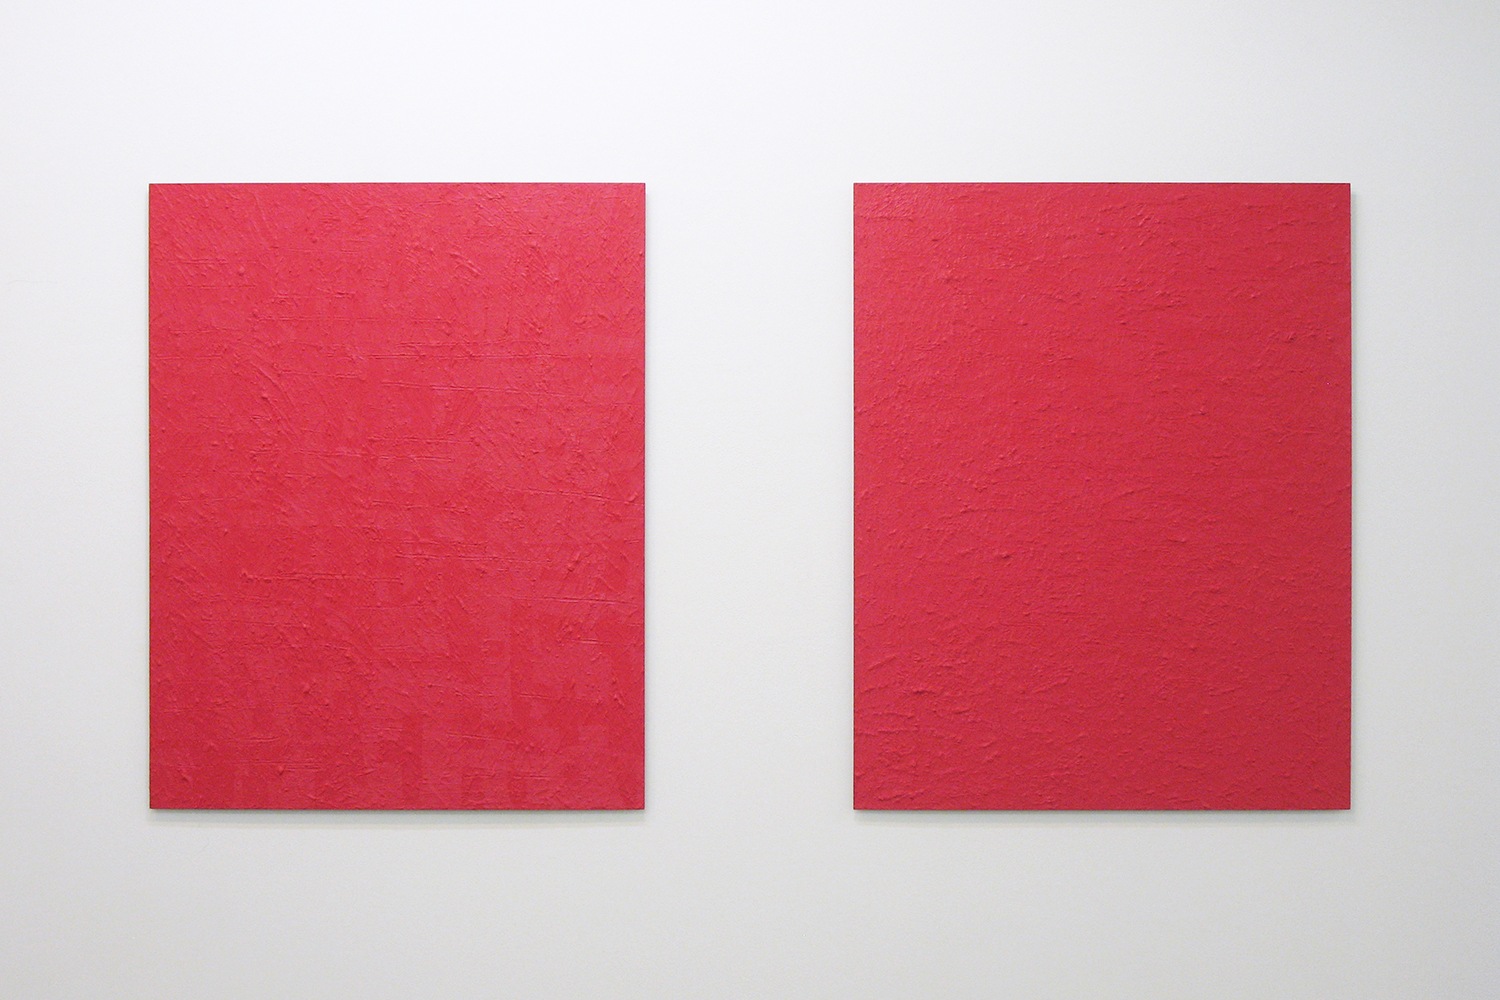  Untitled - Deep Red (right 2 pieces)｜Oil on aluminum｜910 x 727 mm｜2012 each